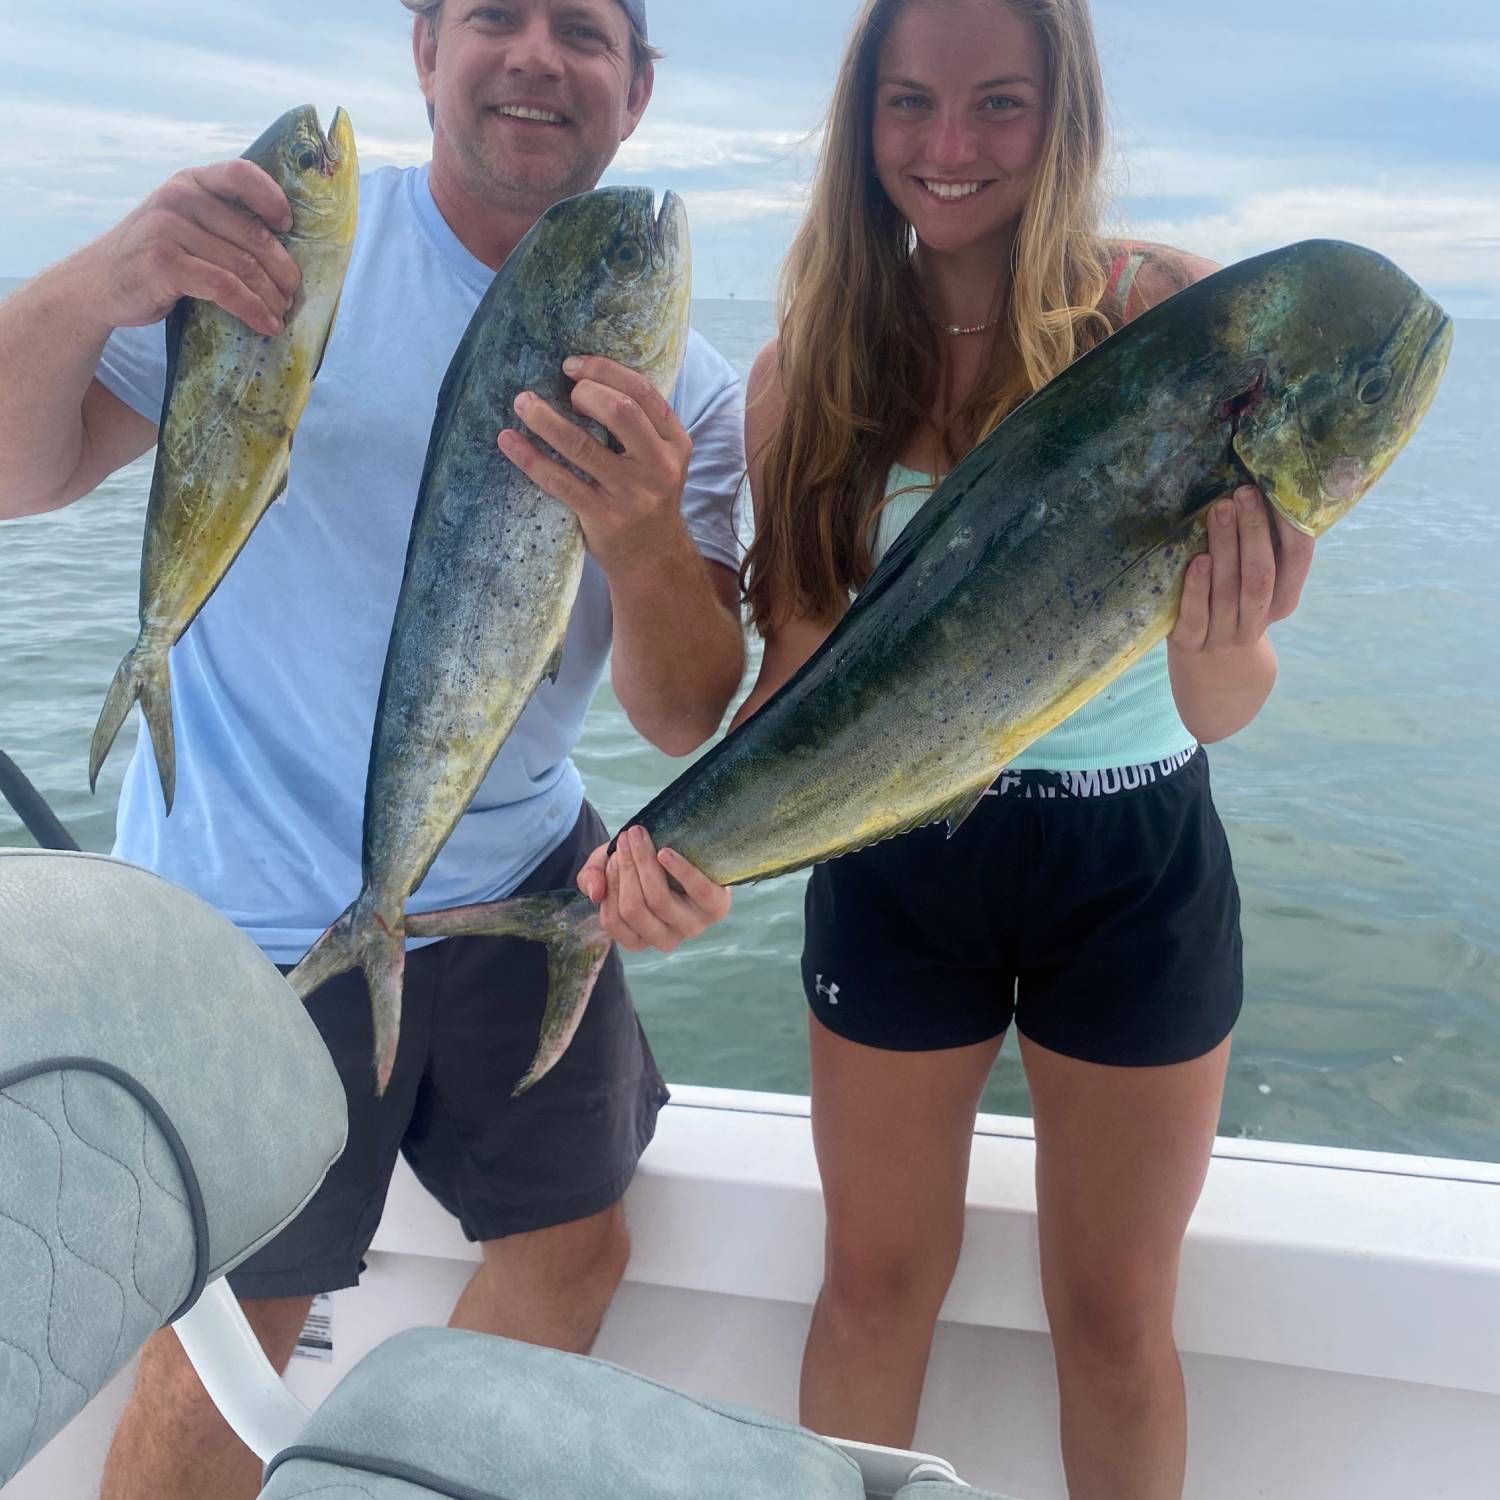 Title: Birthday Mahi! - On board their Sportsman Masters 227 Bay Boat - Location: About 17 miles out in The Gulf off Fort Morgan AL. Participating in the Photo Contest #SportsmanJanuary2024